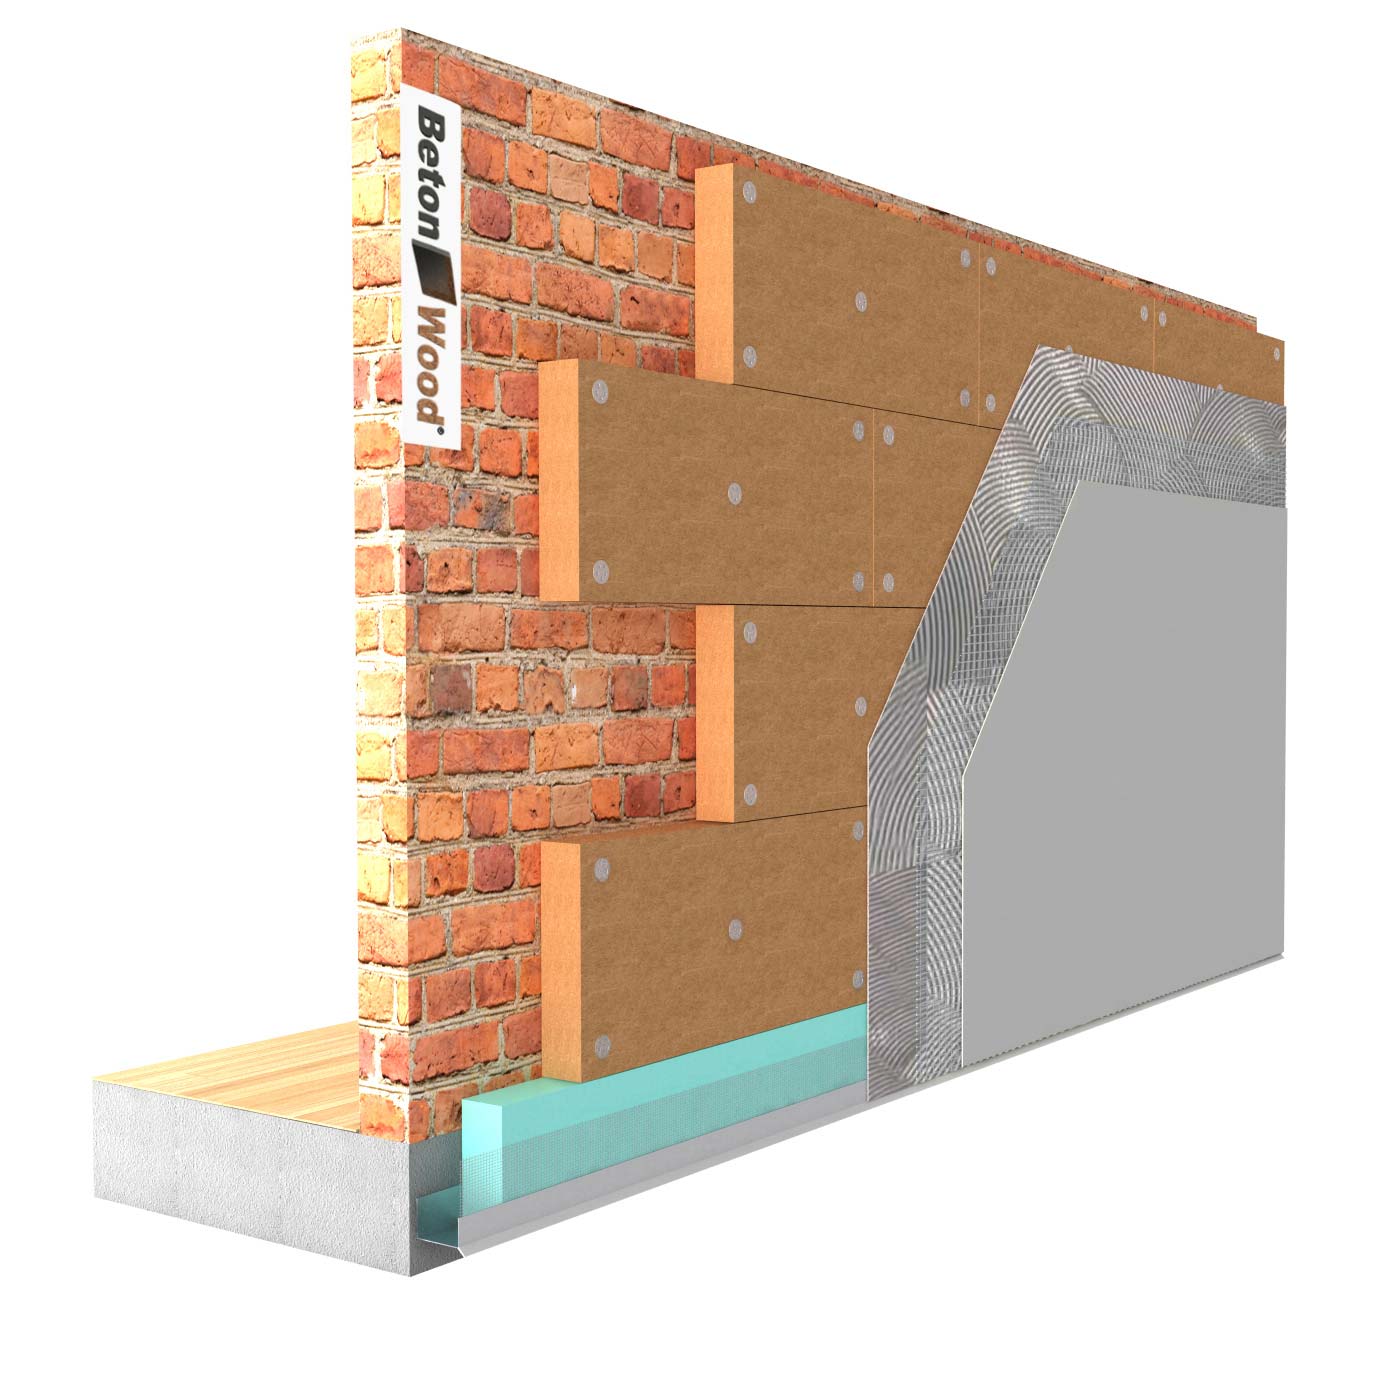 External thermal insulation system in Protect dry Fiber Wood